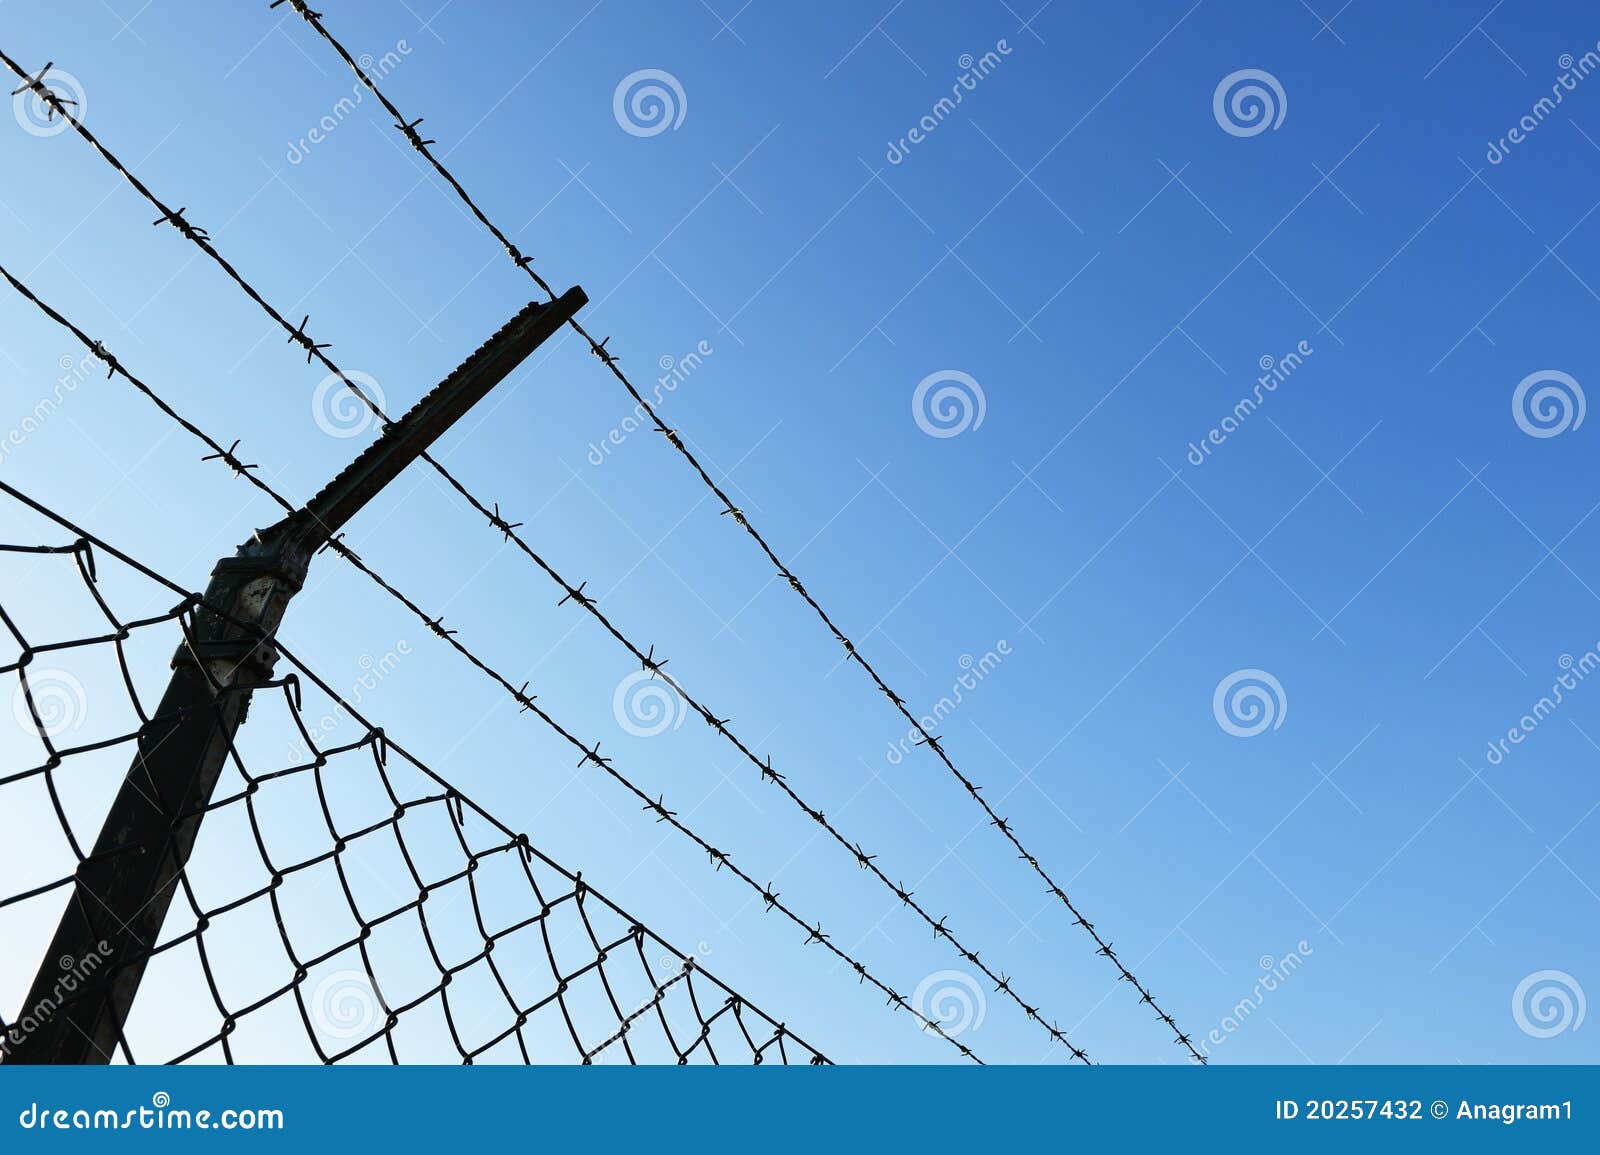 Barbed wire fence stock photo. Image of border, steel - 20257432
